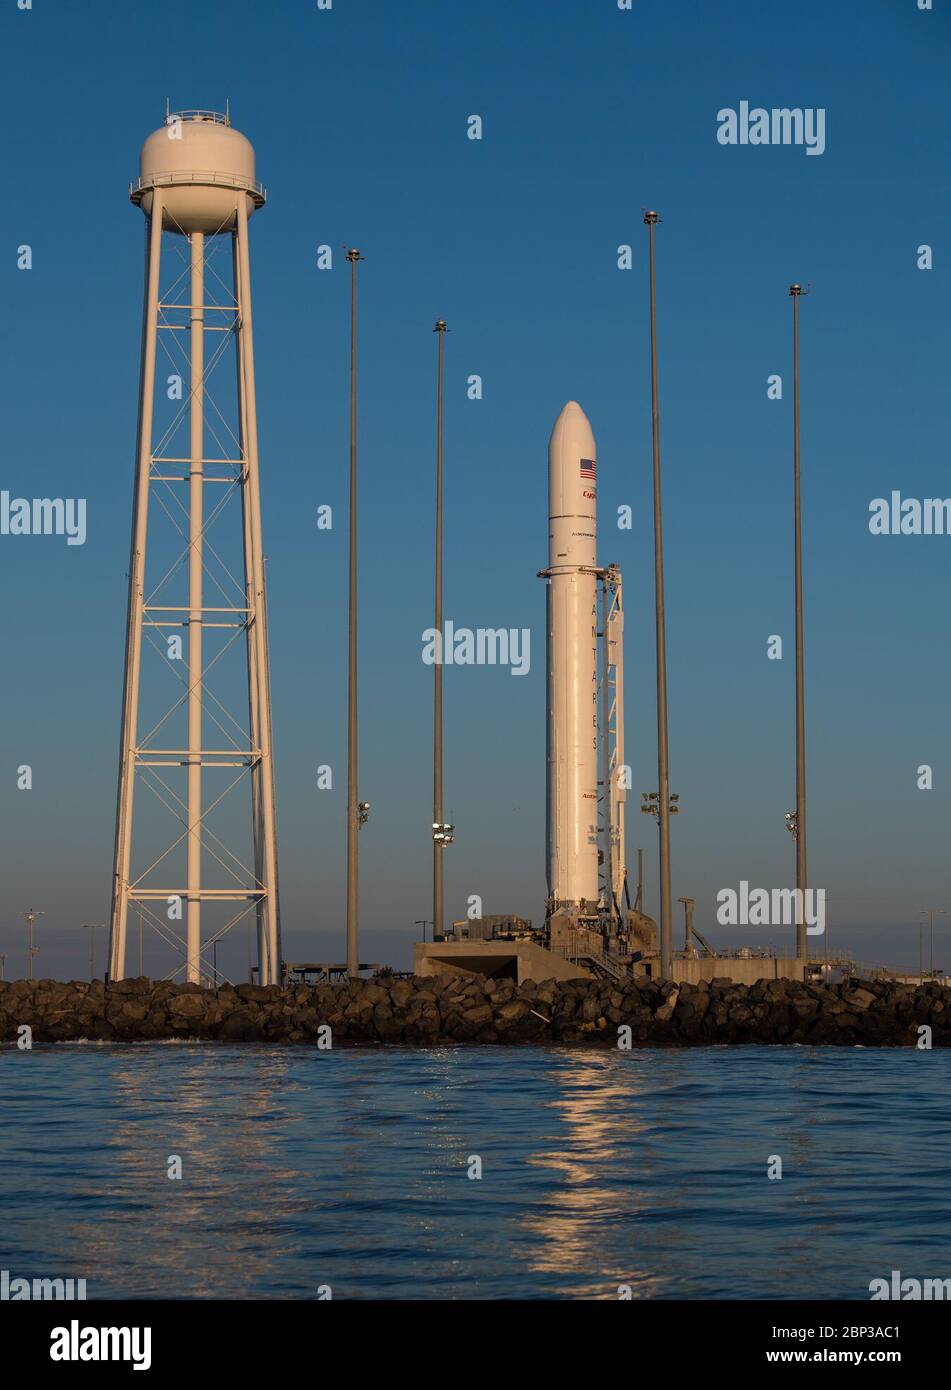 Northrop Grumman Antares CRS-13 Prelaunch  A Northrop Grumman Antares rocket carrying a Cygnus resupply spacecraft is seen at sunrise on Pad-0A, Sunday, Feb. 9, 2020, at NASA's Wallops Flight Facility in Virginia. Northrop Grumman’s 13th contracted cargo resupply mission with NASA to the International Space Station will deliver more than 7,500 pounds of science and research, crew supplies and vehicle hardware to the orbital laboratory and its crew. The CRS-13 Cygnus spacecraft is named after the first African American astronaut, Major Robert Henry Lawrence Jr.. Stock Photo